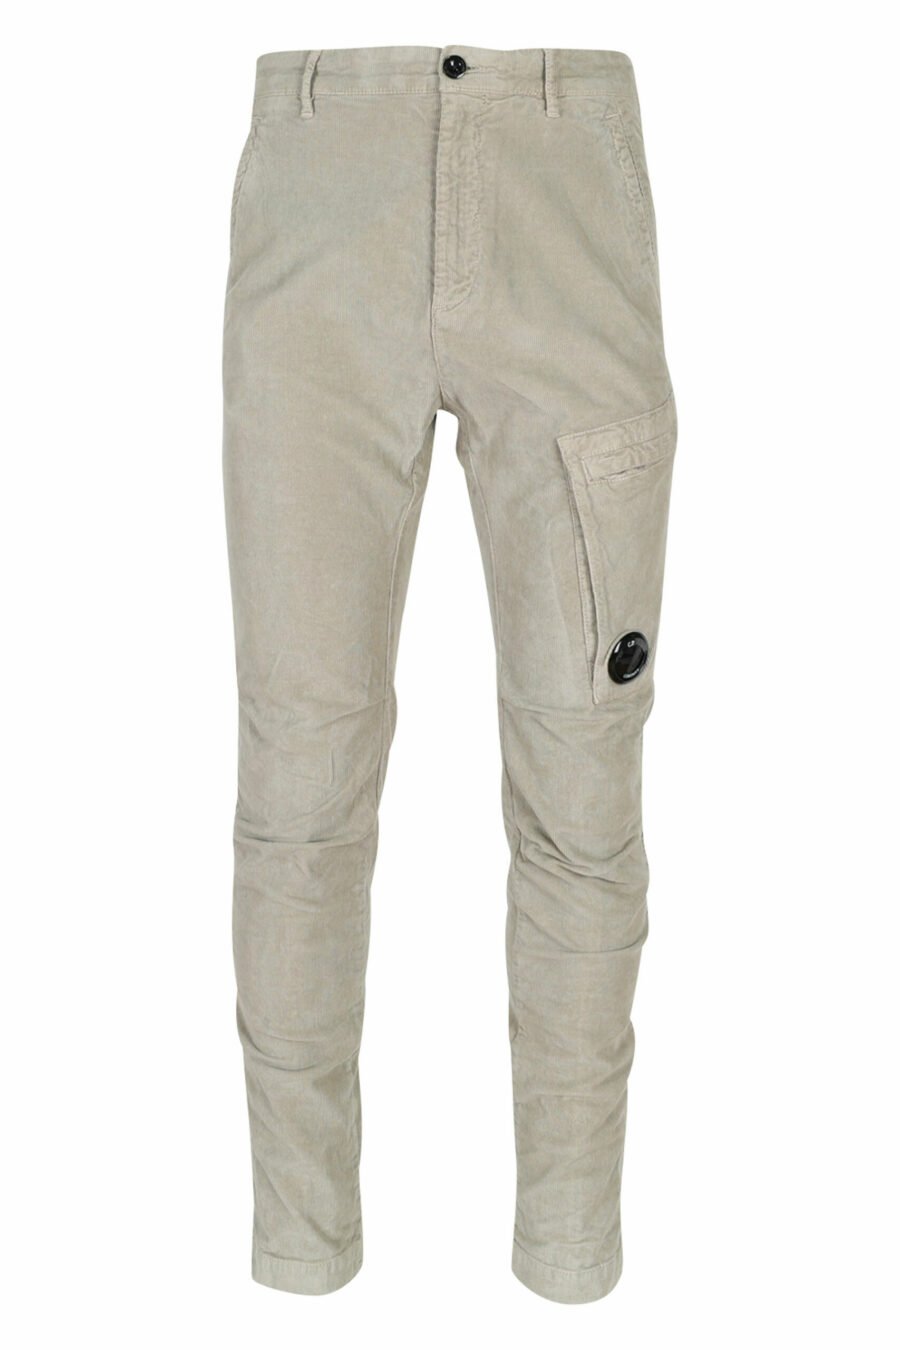 Beige corduroy trousers with side pocket and lens logo - 7620943650518 scaled